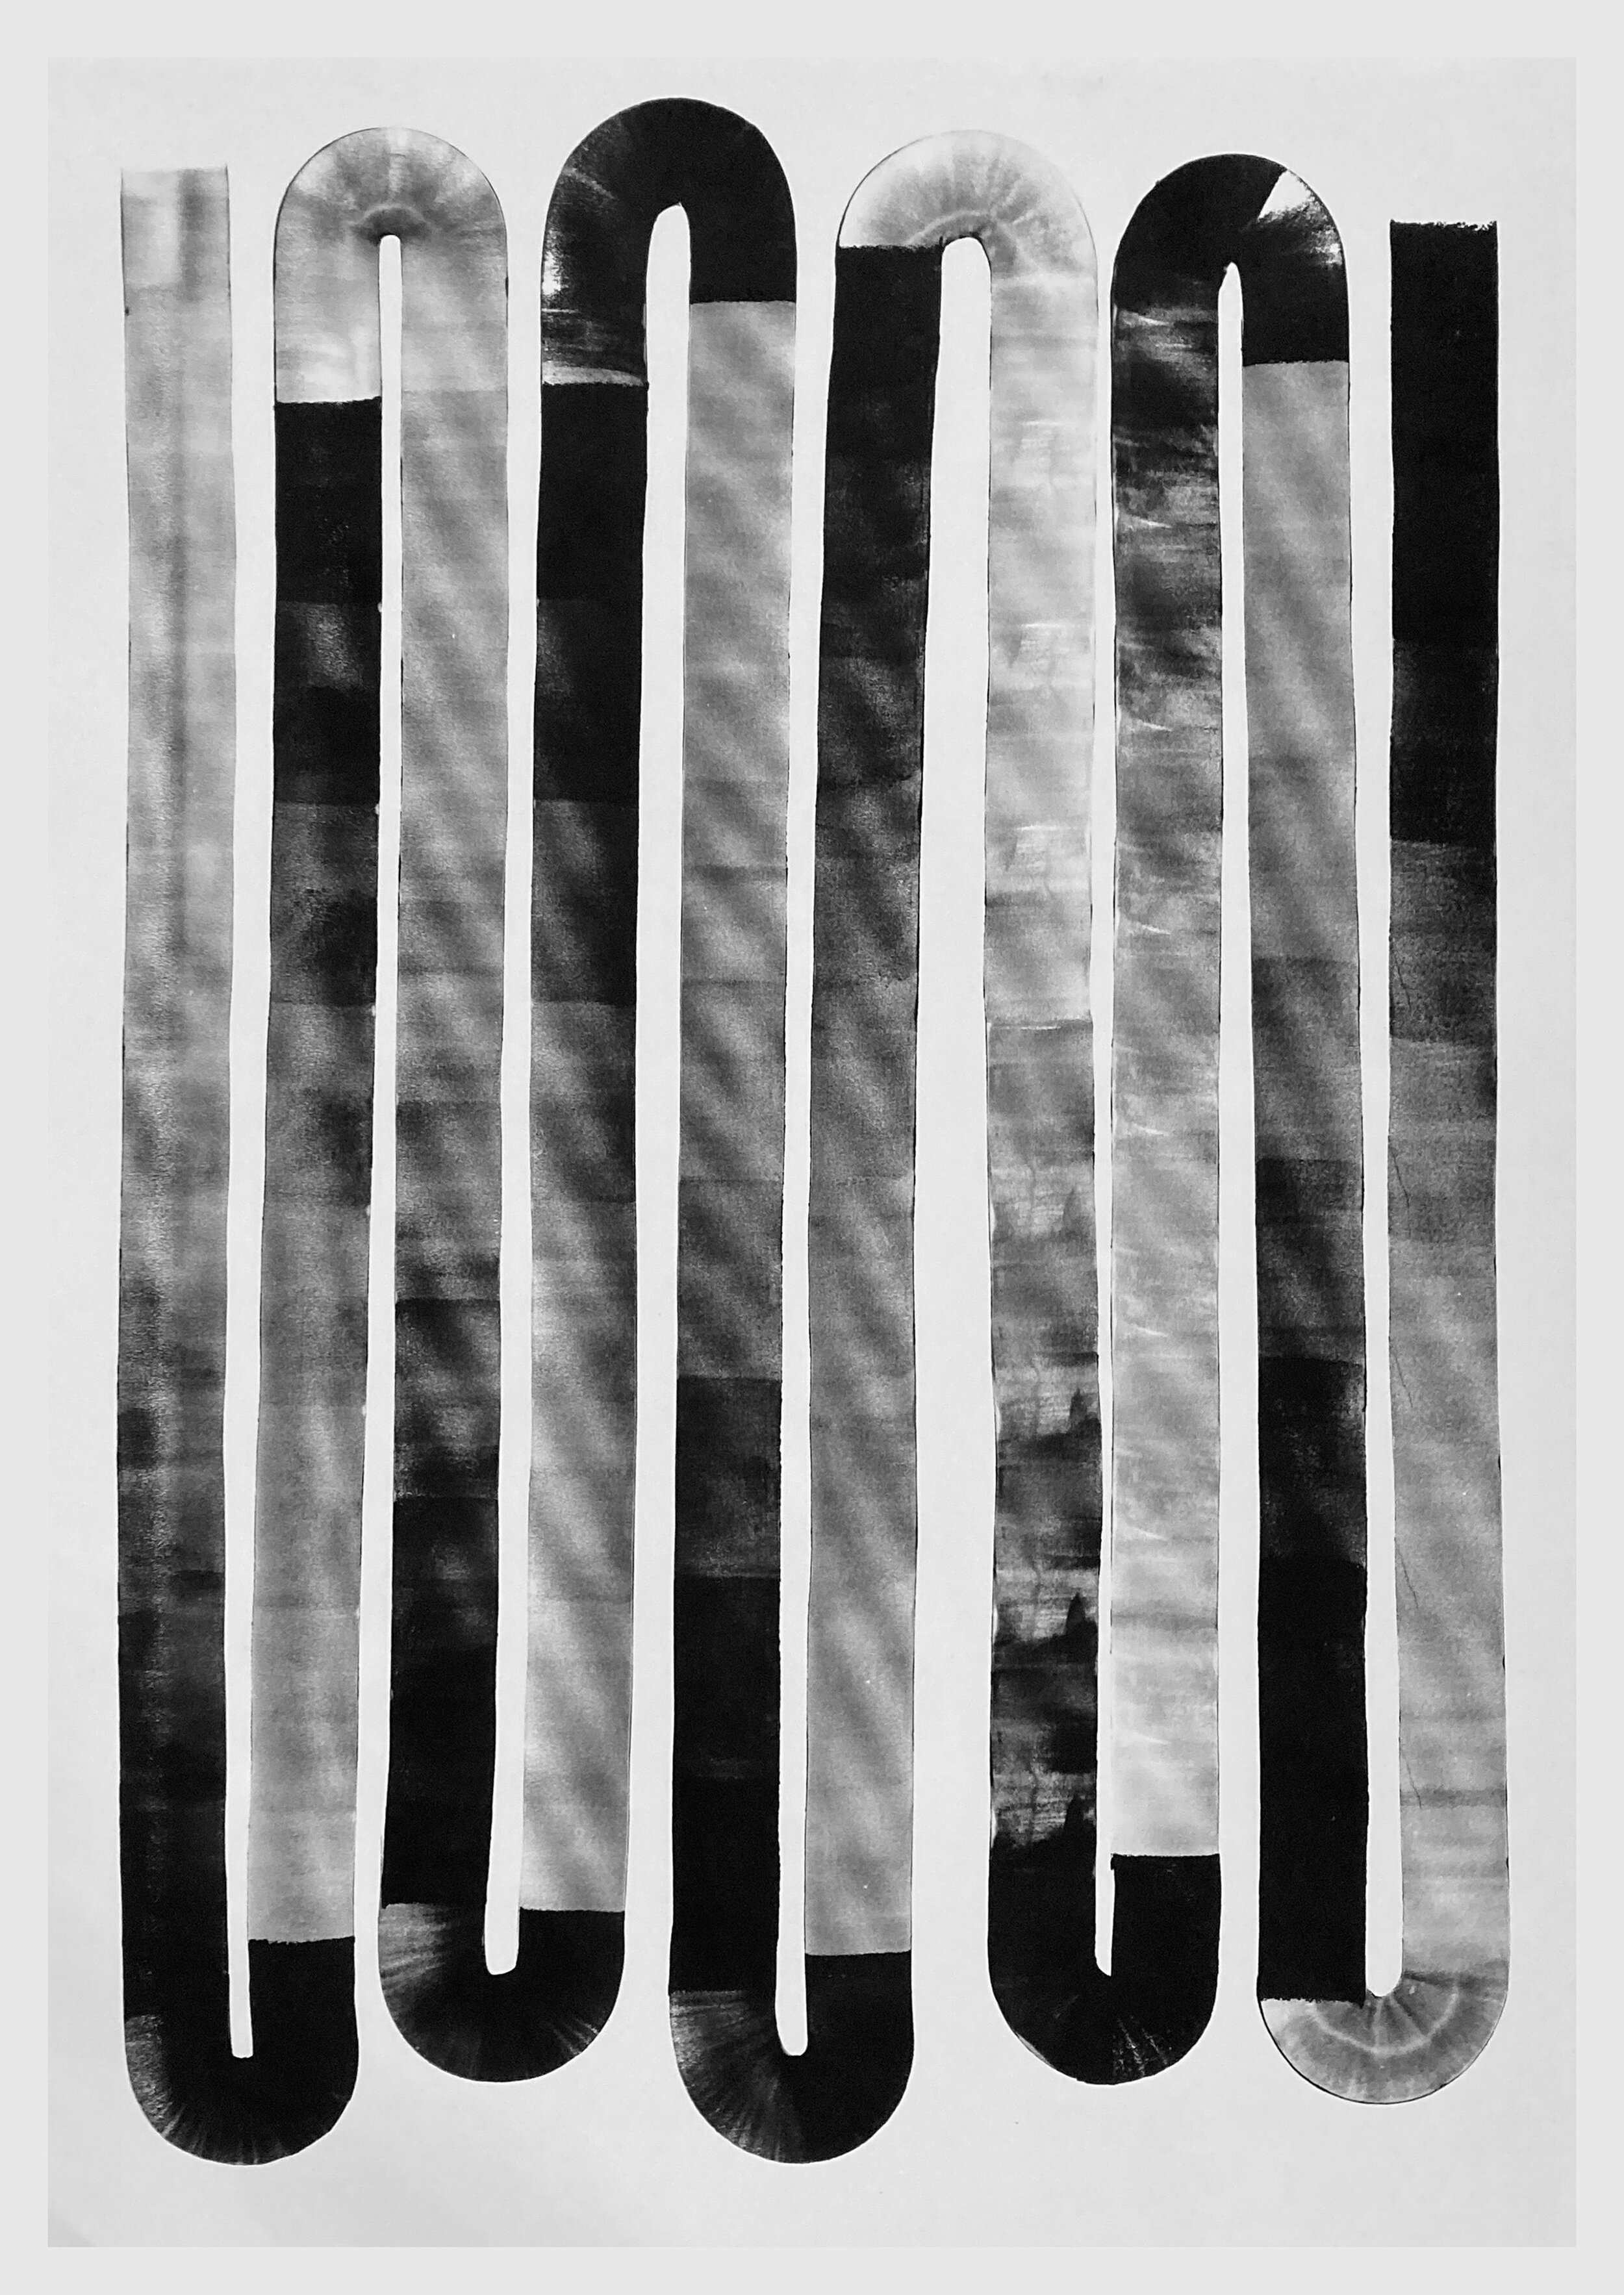  Radiator, 2021, Litho ink on paper, 44 x 30 inches (unframed) 